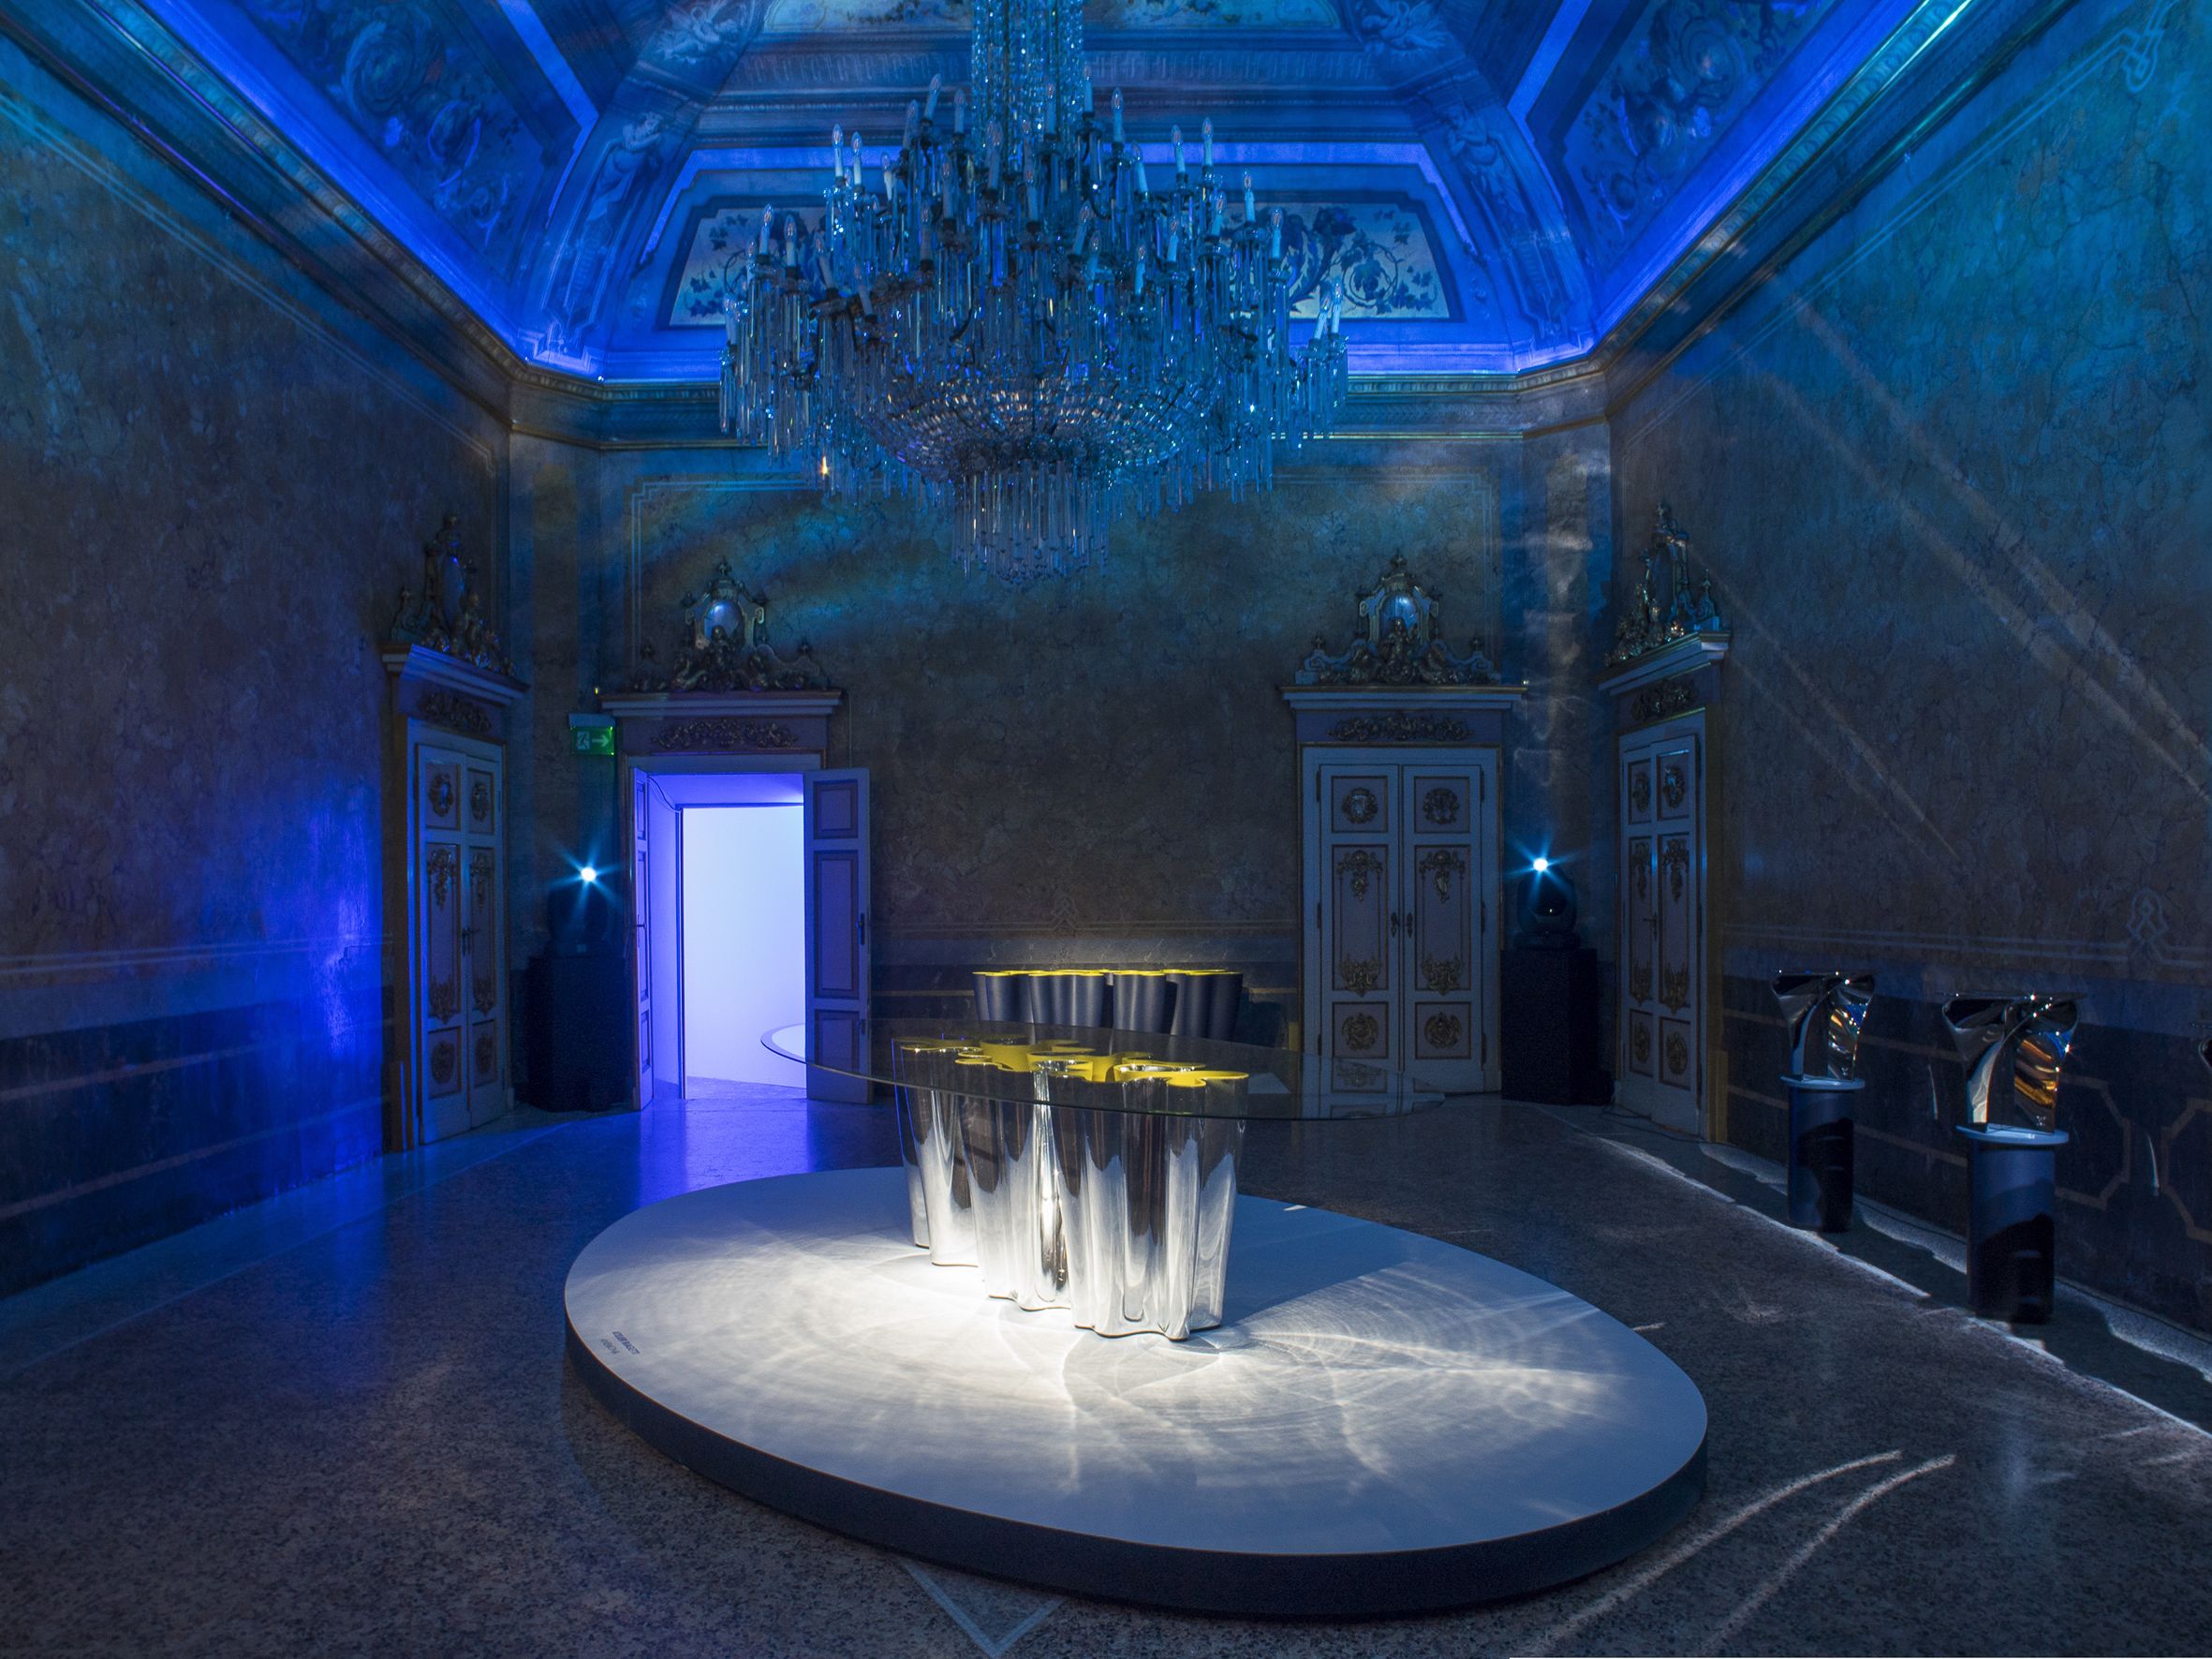 Louis Vuitton, Objets Nomades: Magnificent Event At Fuorisalone